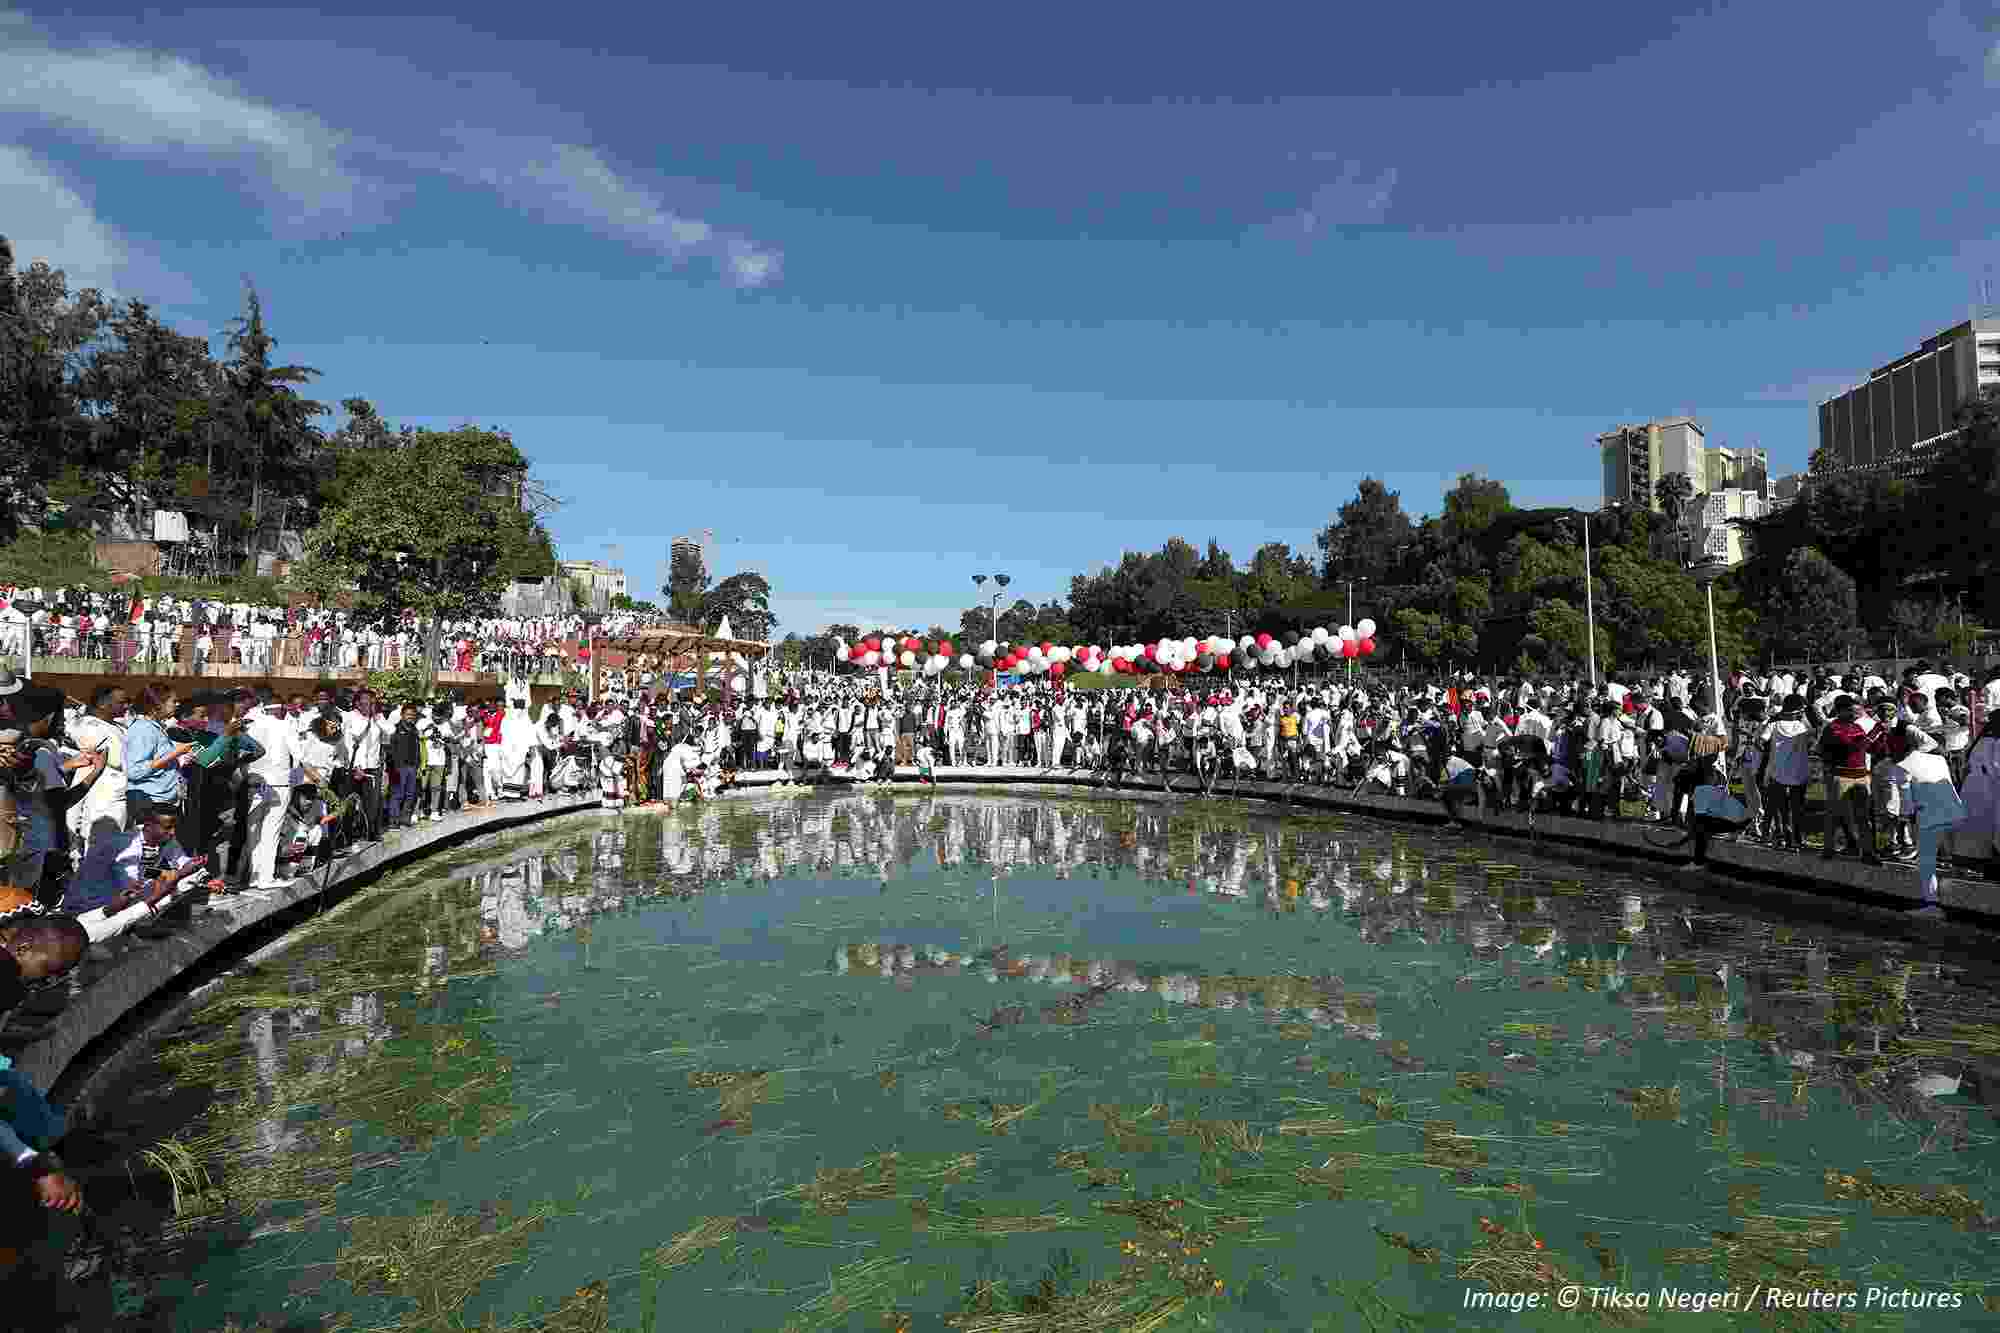 Image shows crowds of people gathered around a pond, celebrating Irreecha with colourful clothing and flowers